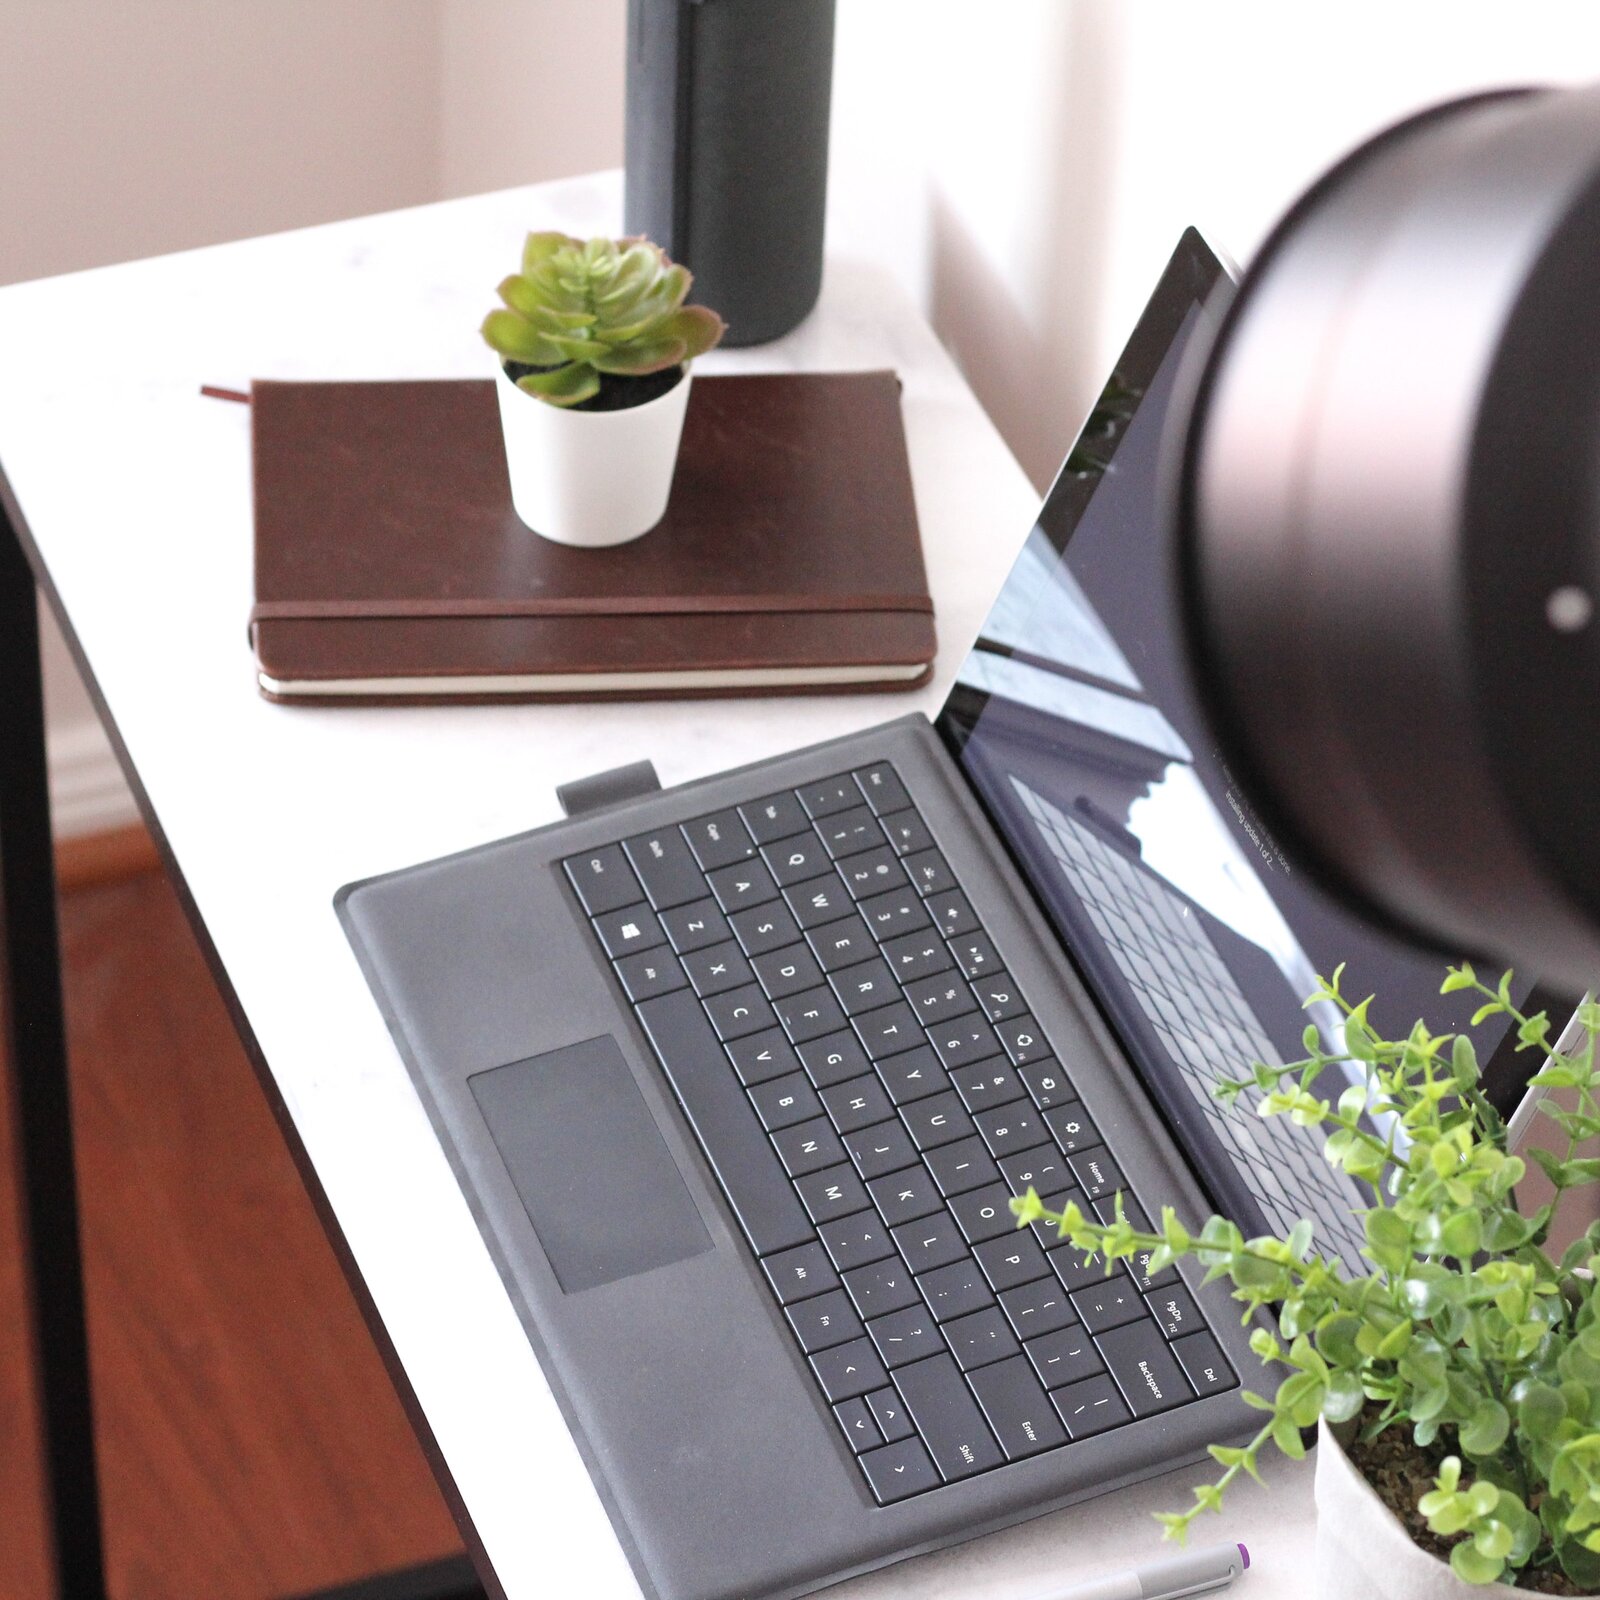 Laptop sits open on top of a desk next to leather notebook and potted plants